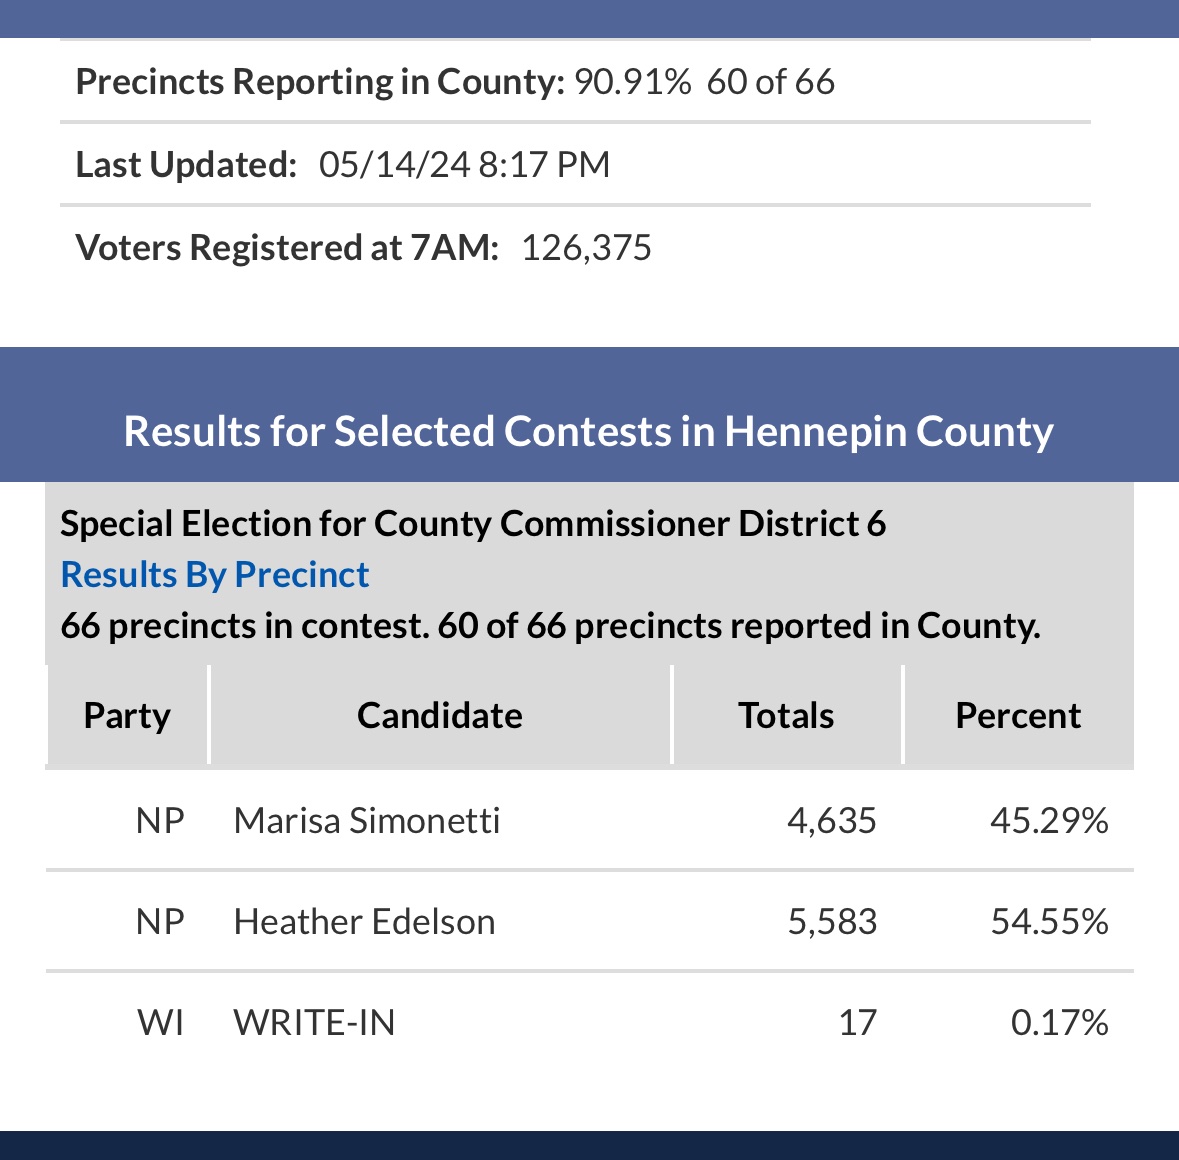 With 91% of precincts reporting, Heather Edelson is up by about 10% and 900 votes.

Congratulations to our next commissioner from Hennepin County District 6.